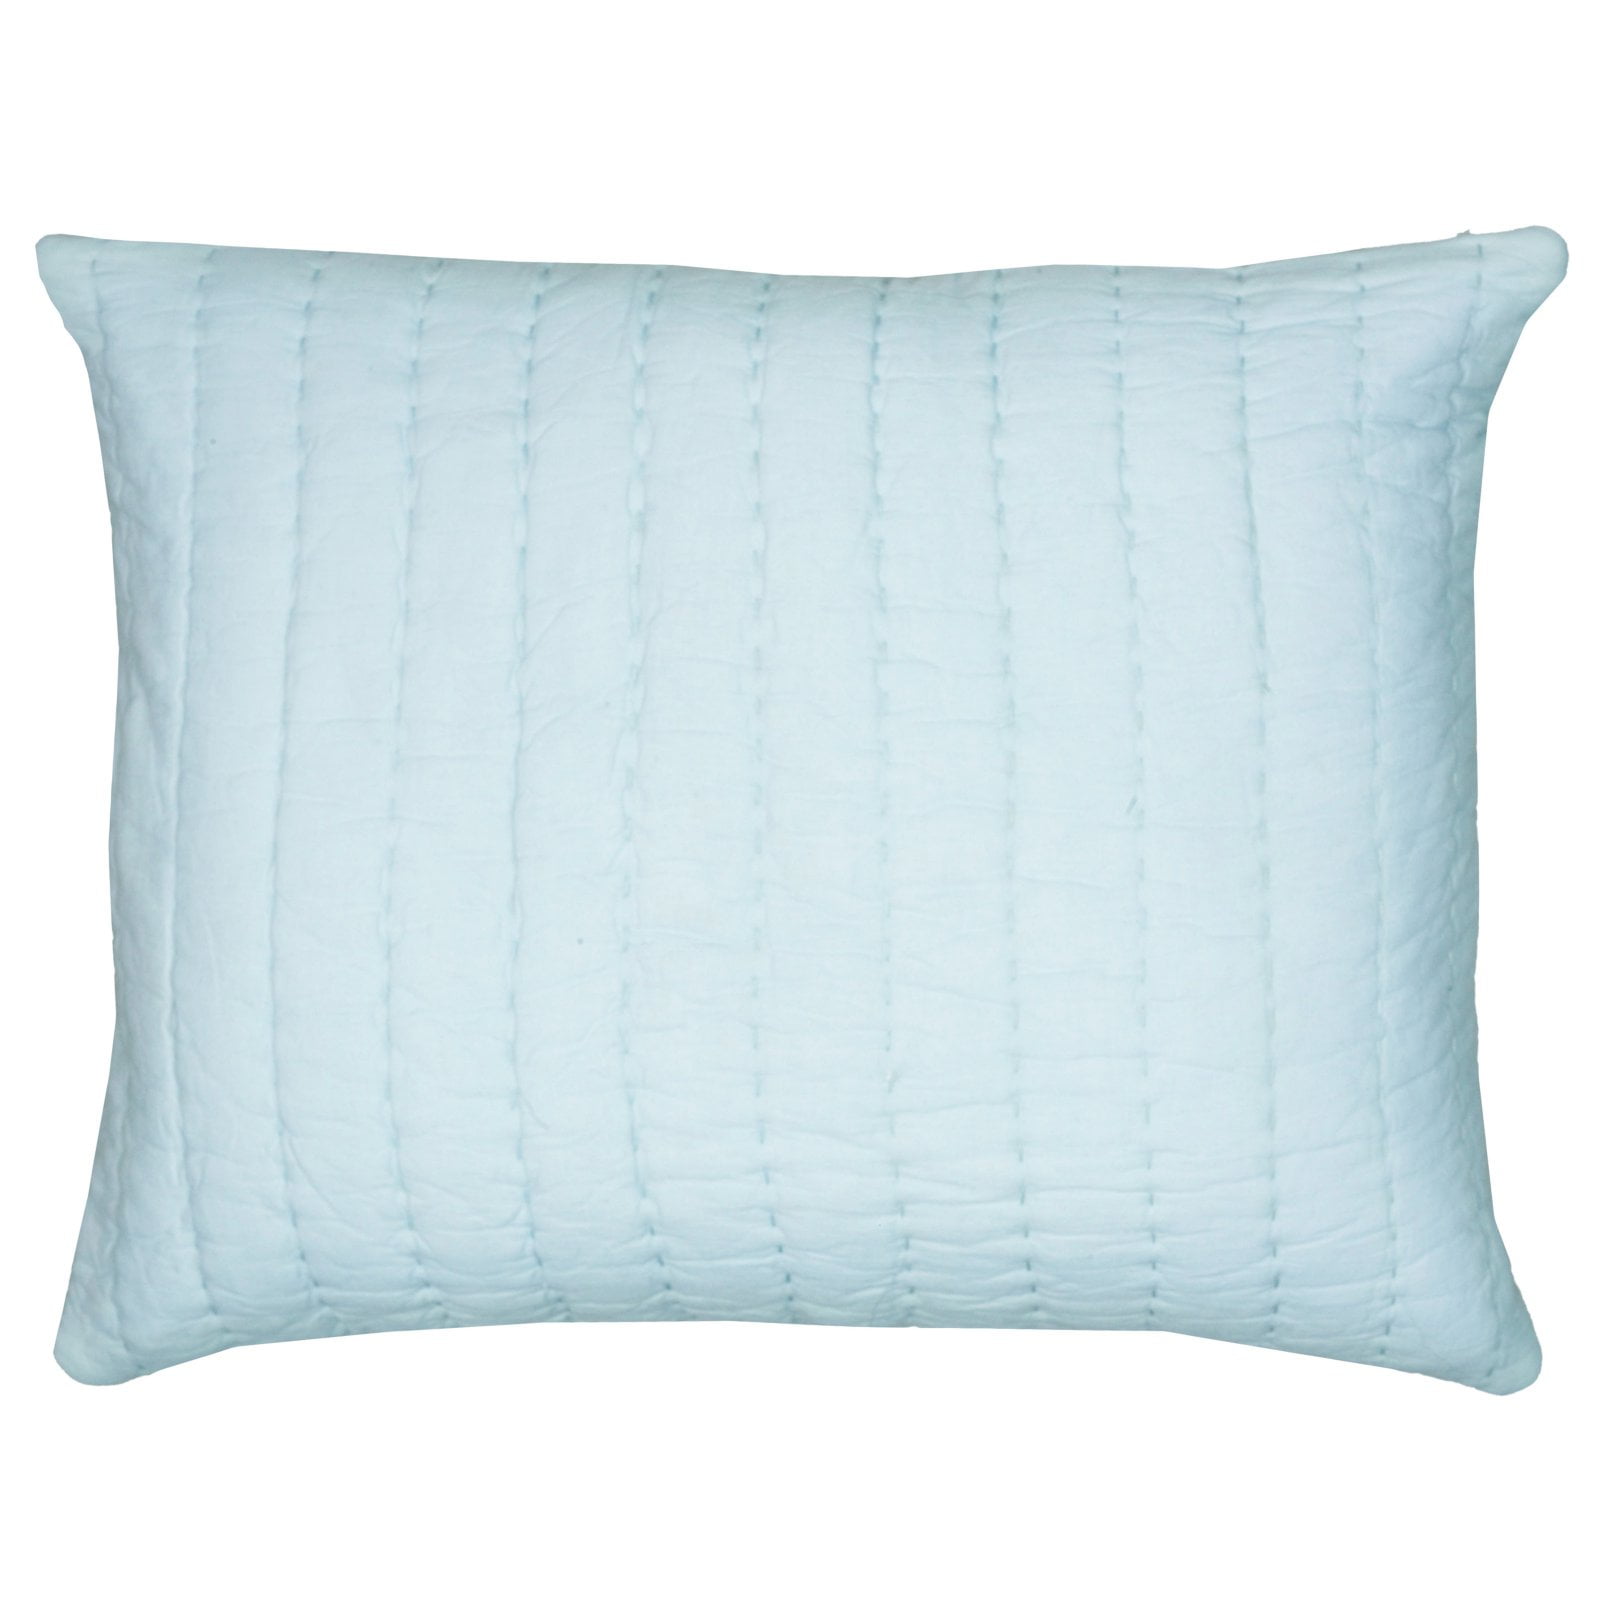 Gracie Blossom Quilted Sham by Rizzy Home - Walmart.com